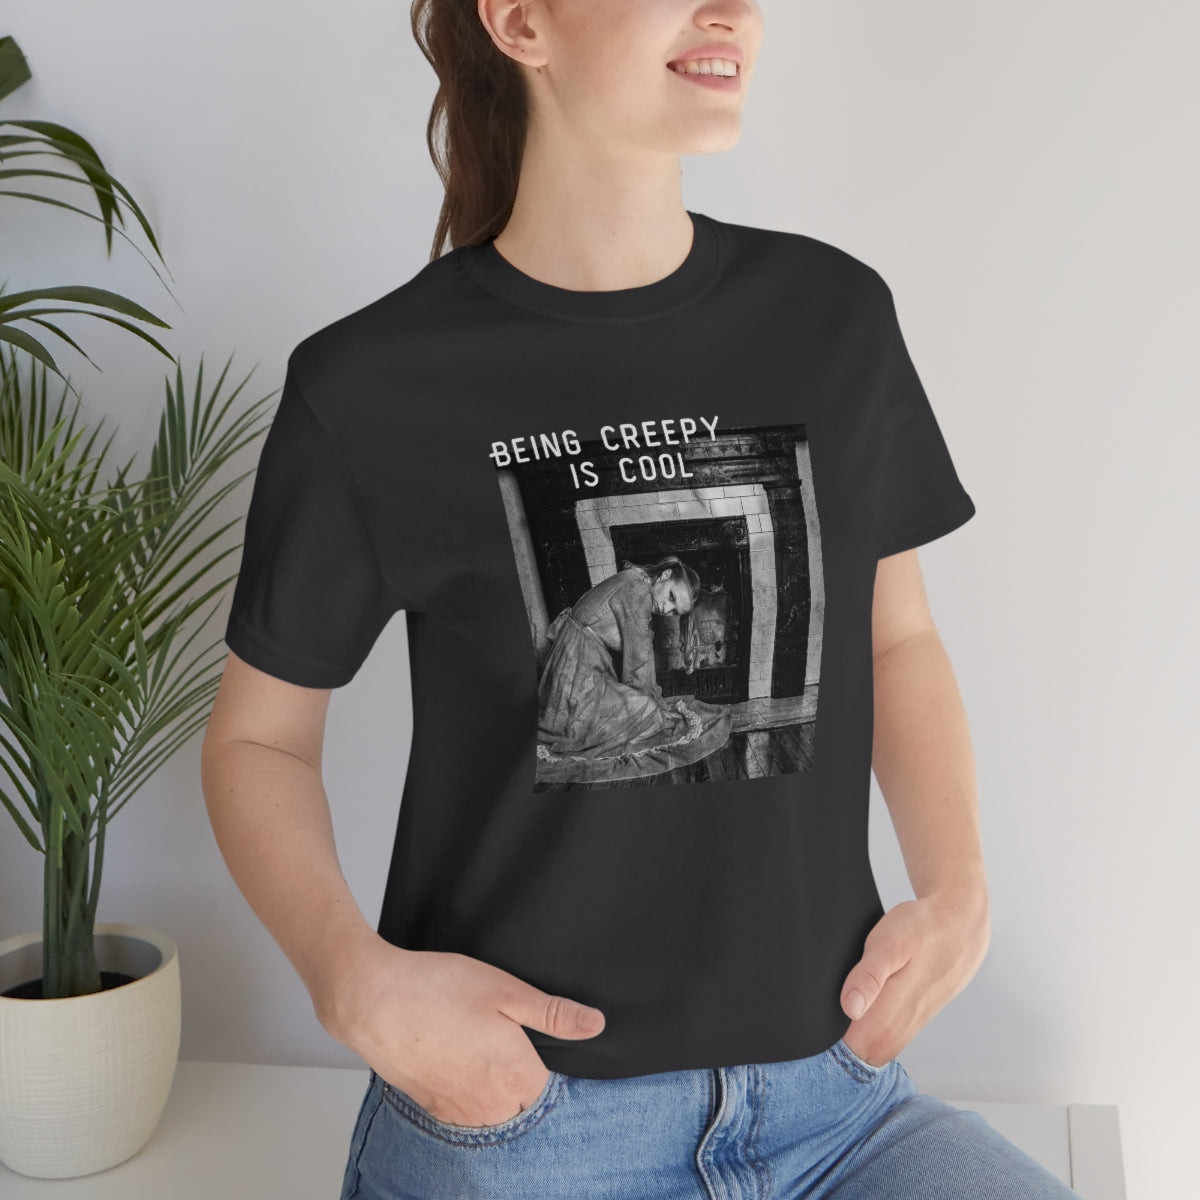 BEING CREEPY IS COOL - UNISEX FIT